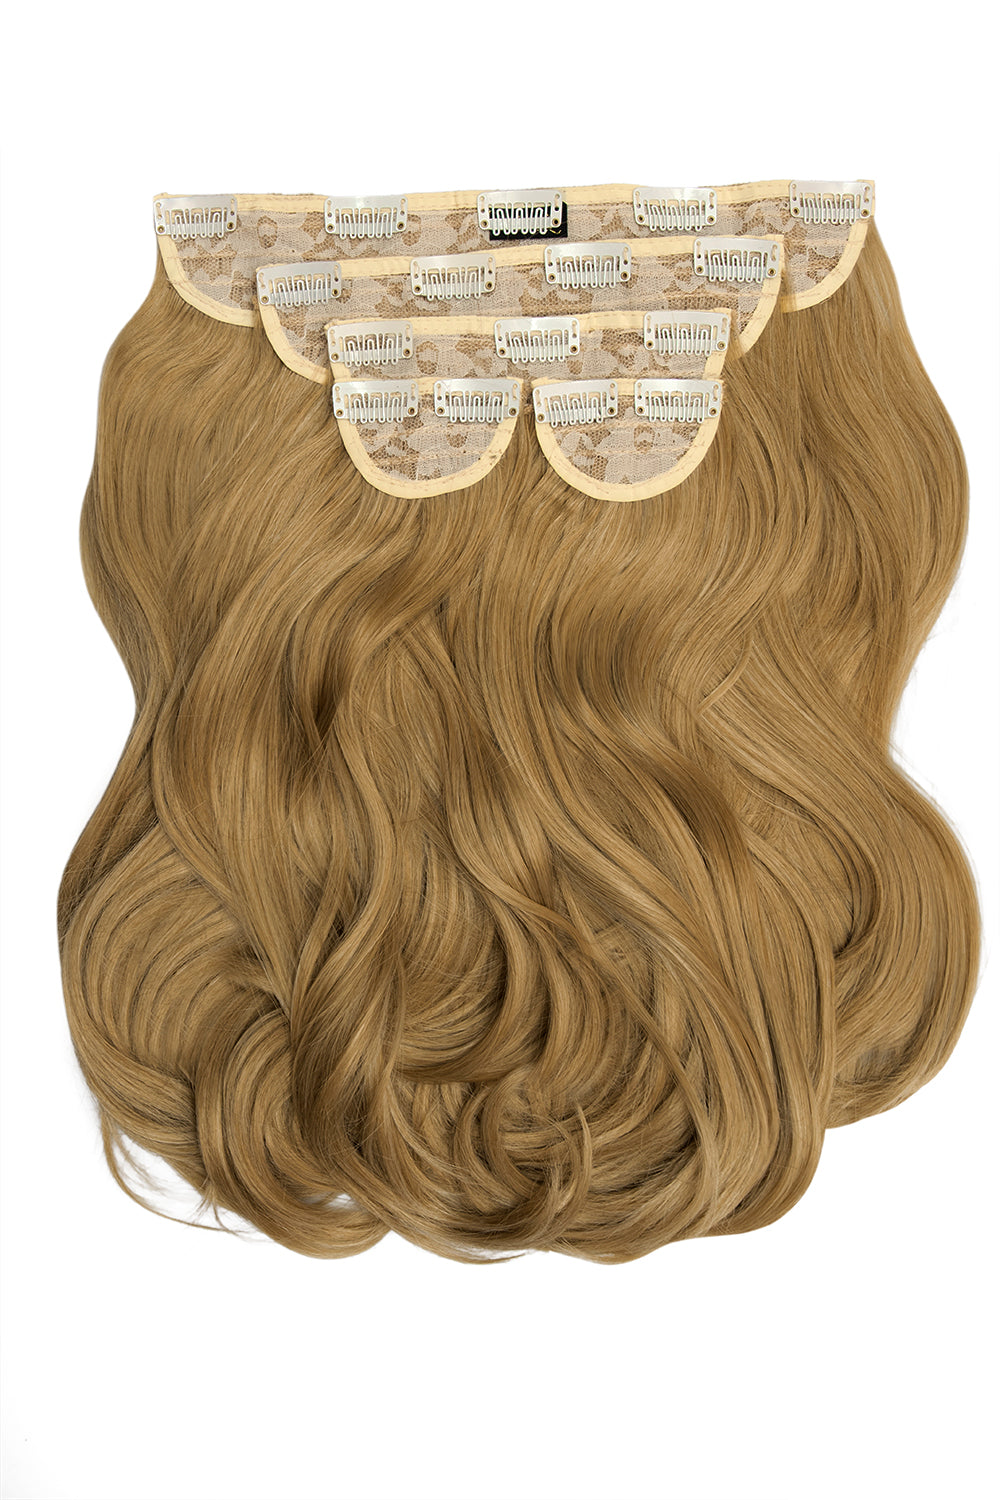 Super Thick 16" 5 Piece Blow Dry Wavy Clip In Hair Extensions - Harvest Blonde